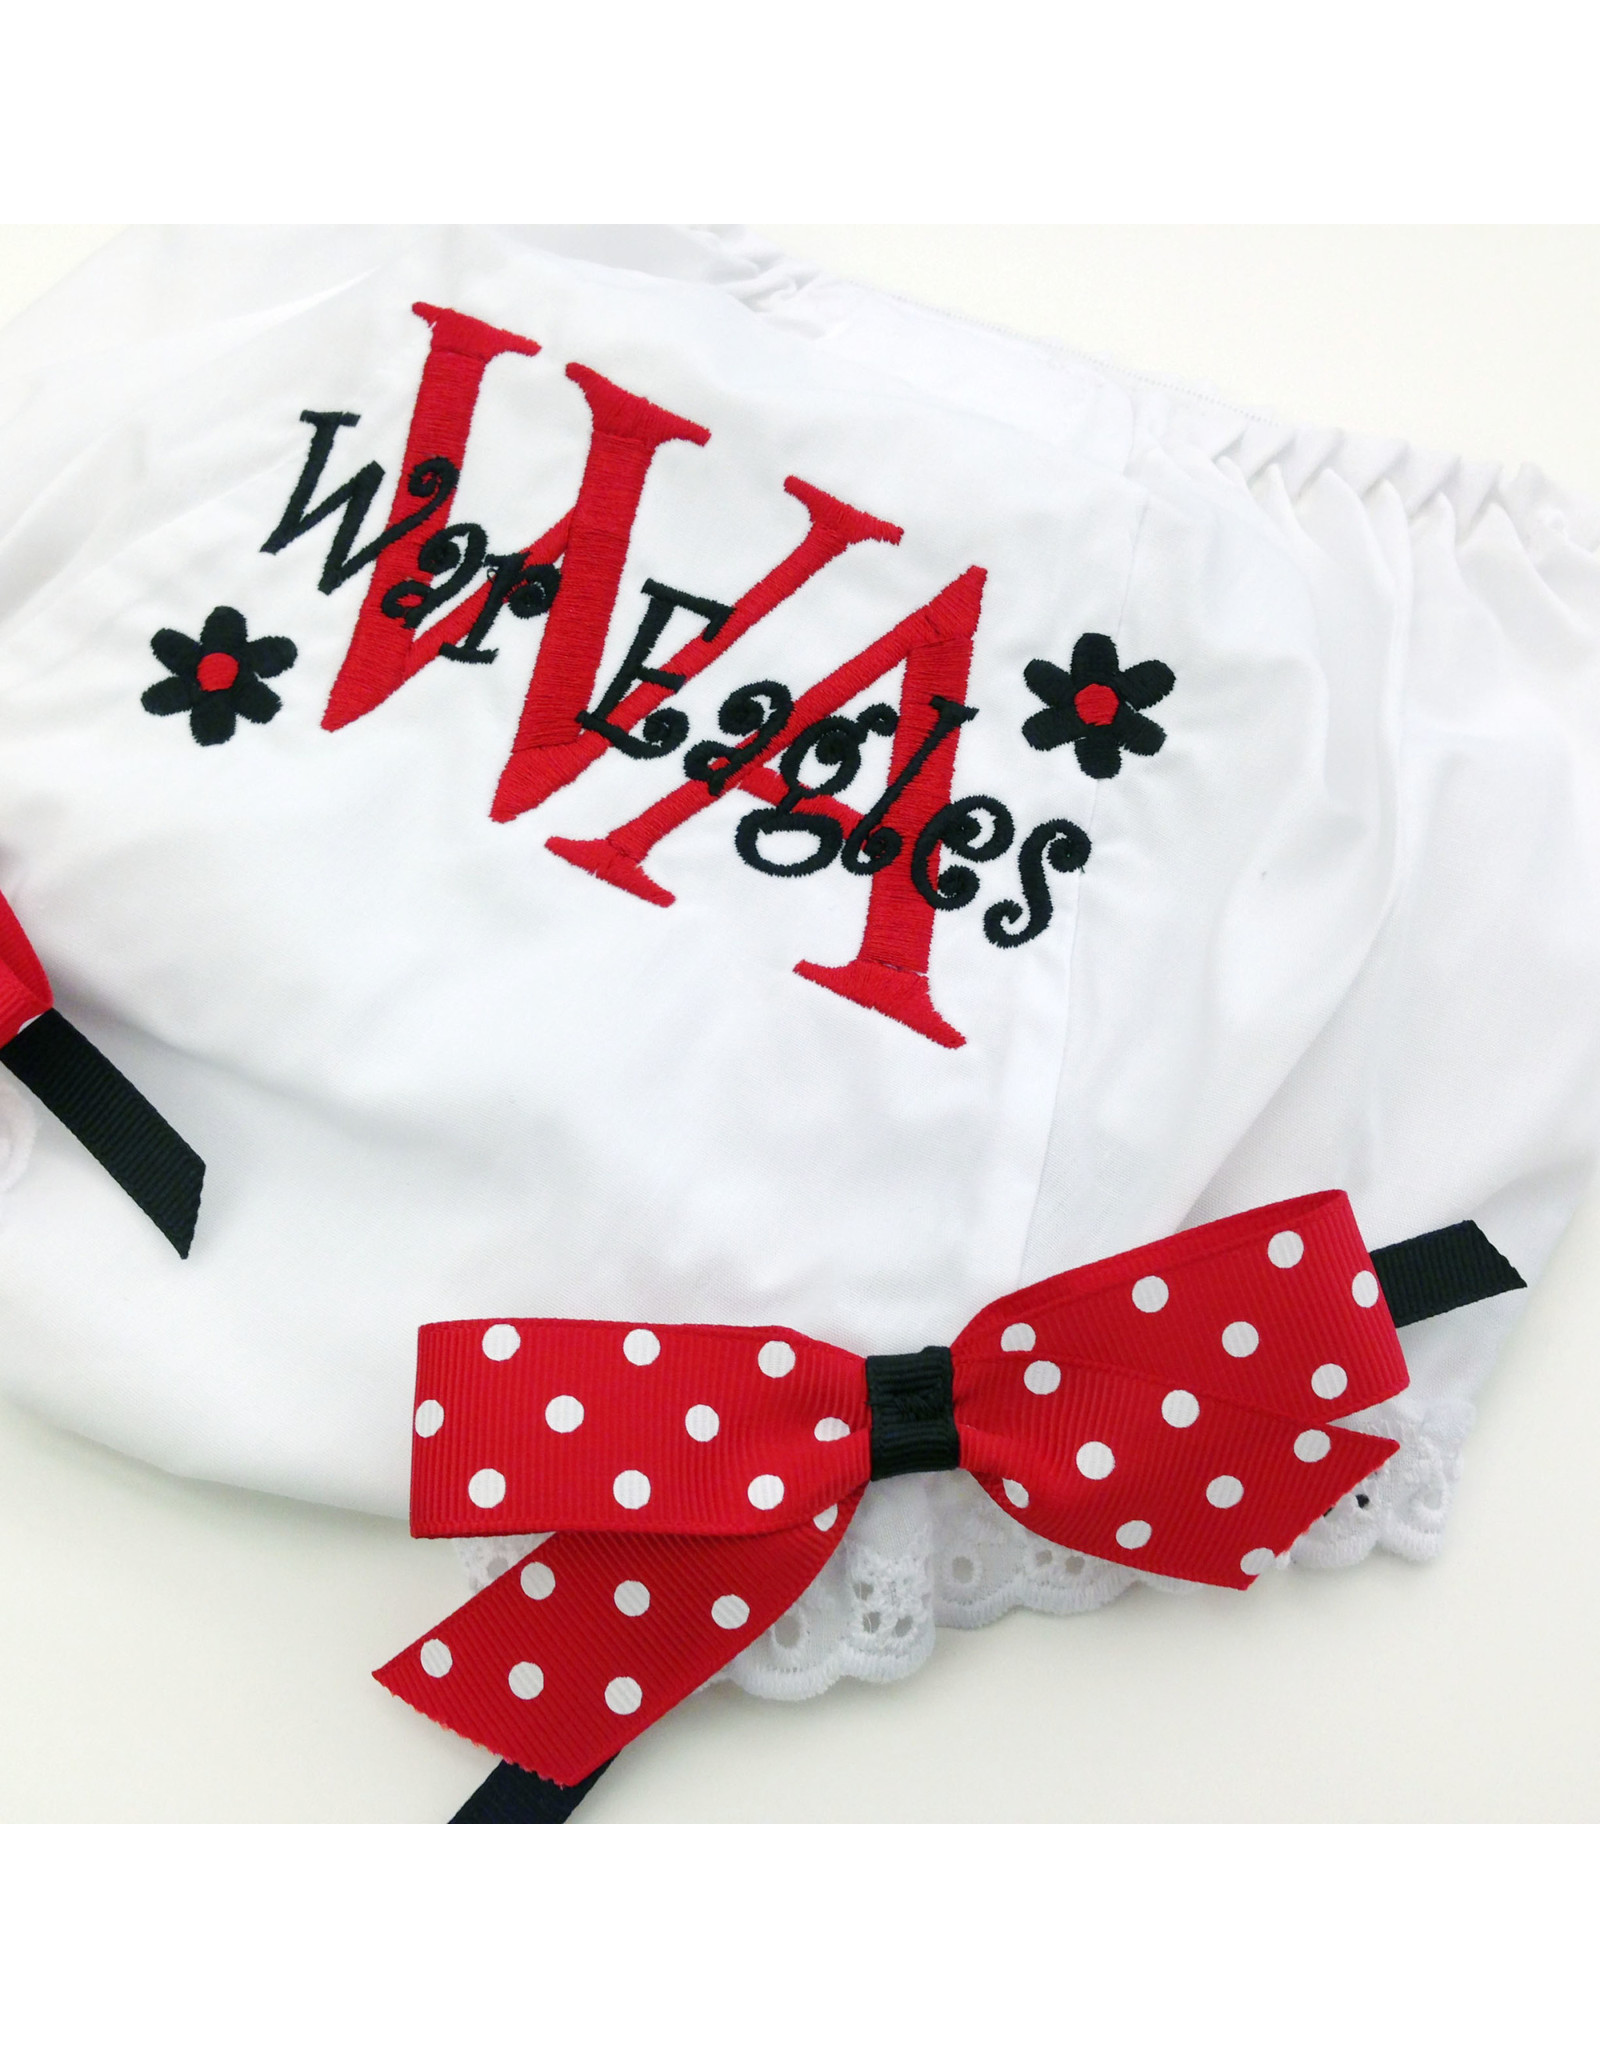 Handmade Vendor Baby Diaper Cover with Bows and Embroidery